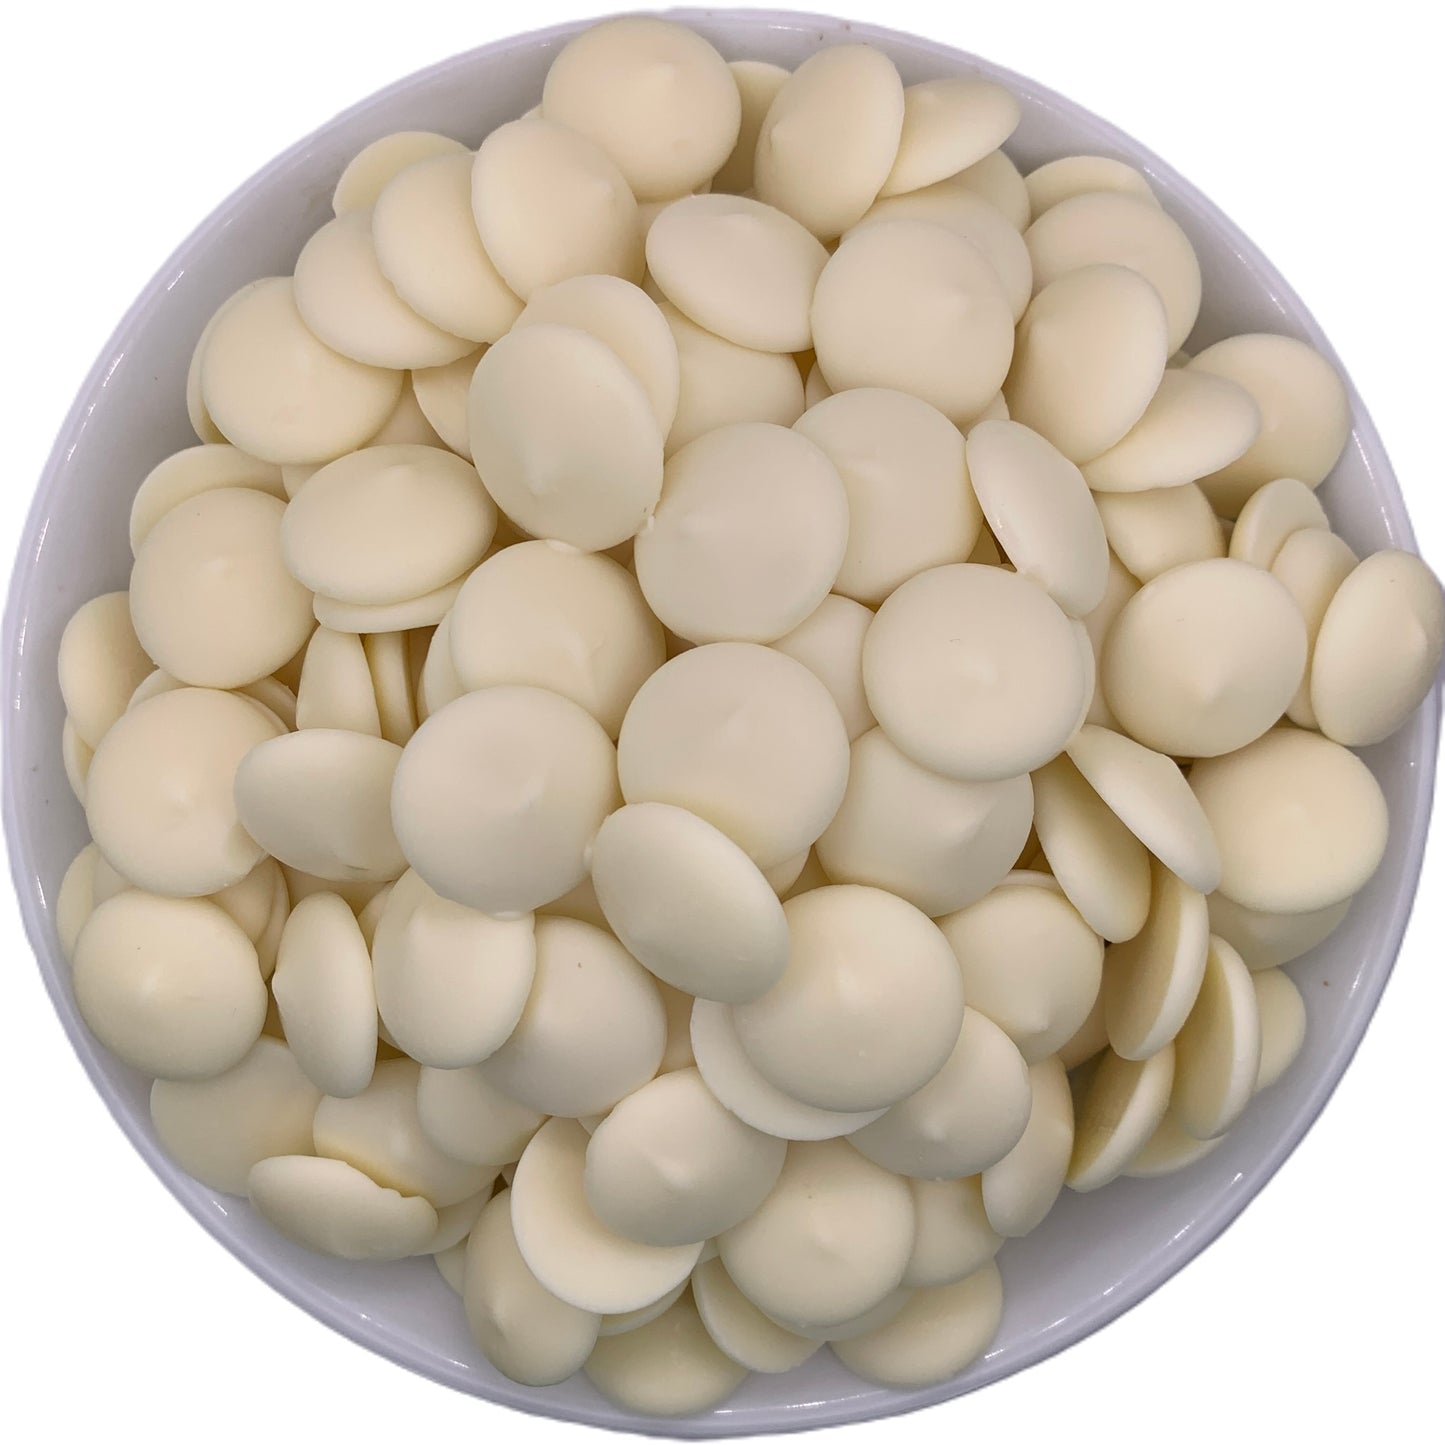 Direct overhead shot of a bowl of Merckens white chocolate melting wafers, displaying the neatly stacked white discs ready for gourmet chocolate making.